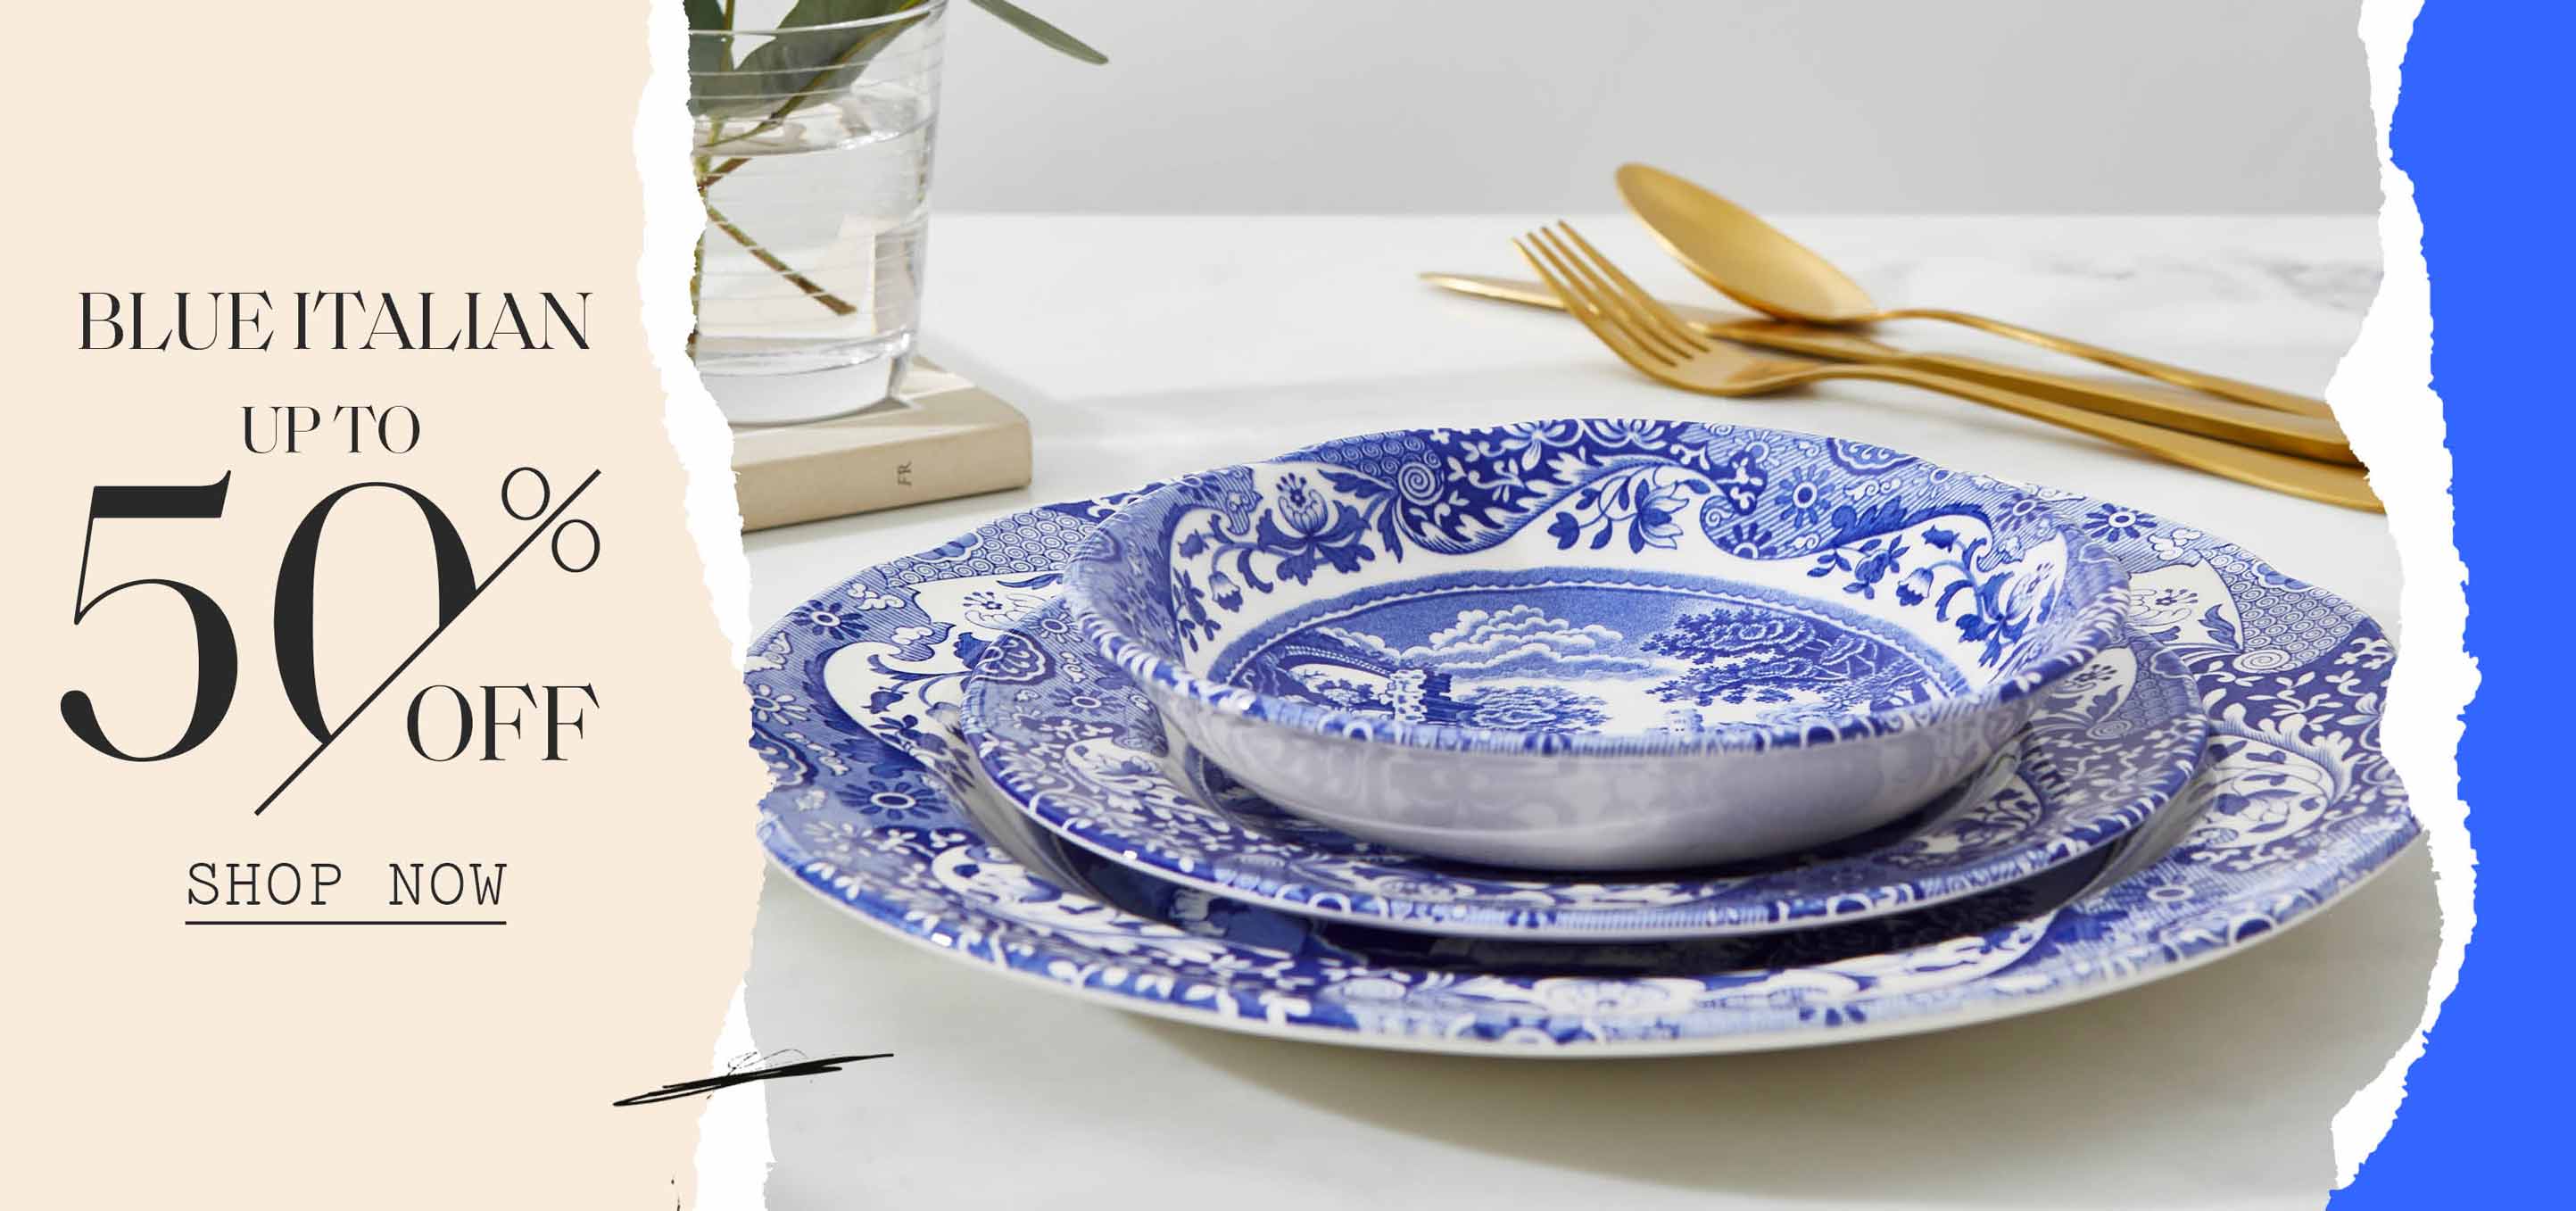 Celebrate British heritage with the famous Blue Italian collection by Spode.